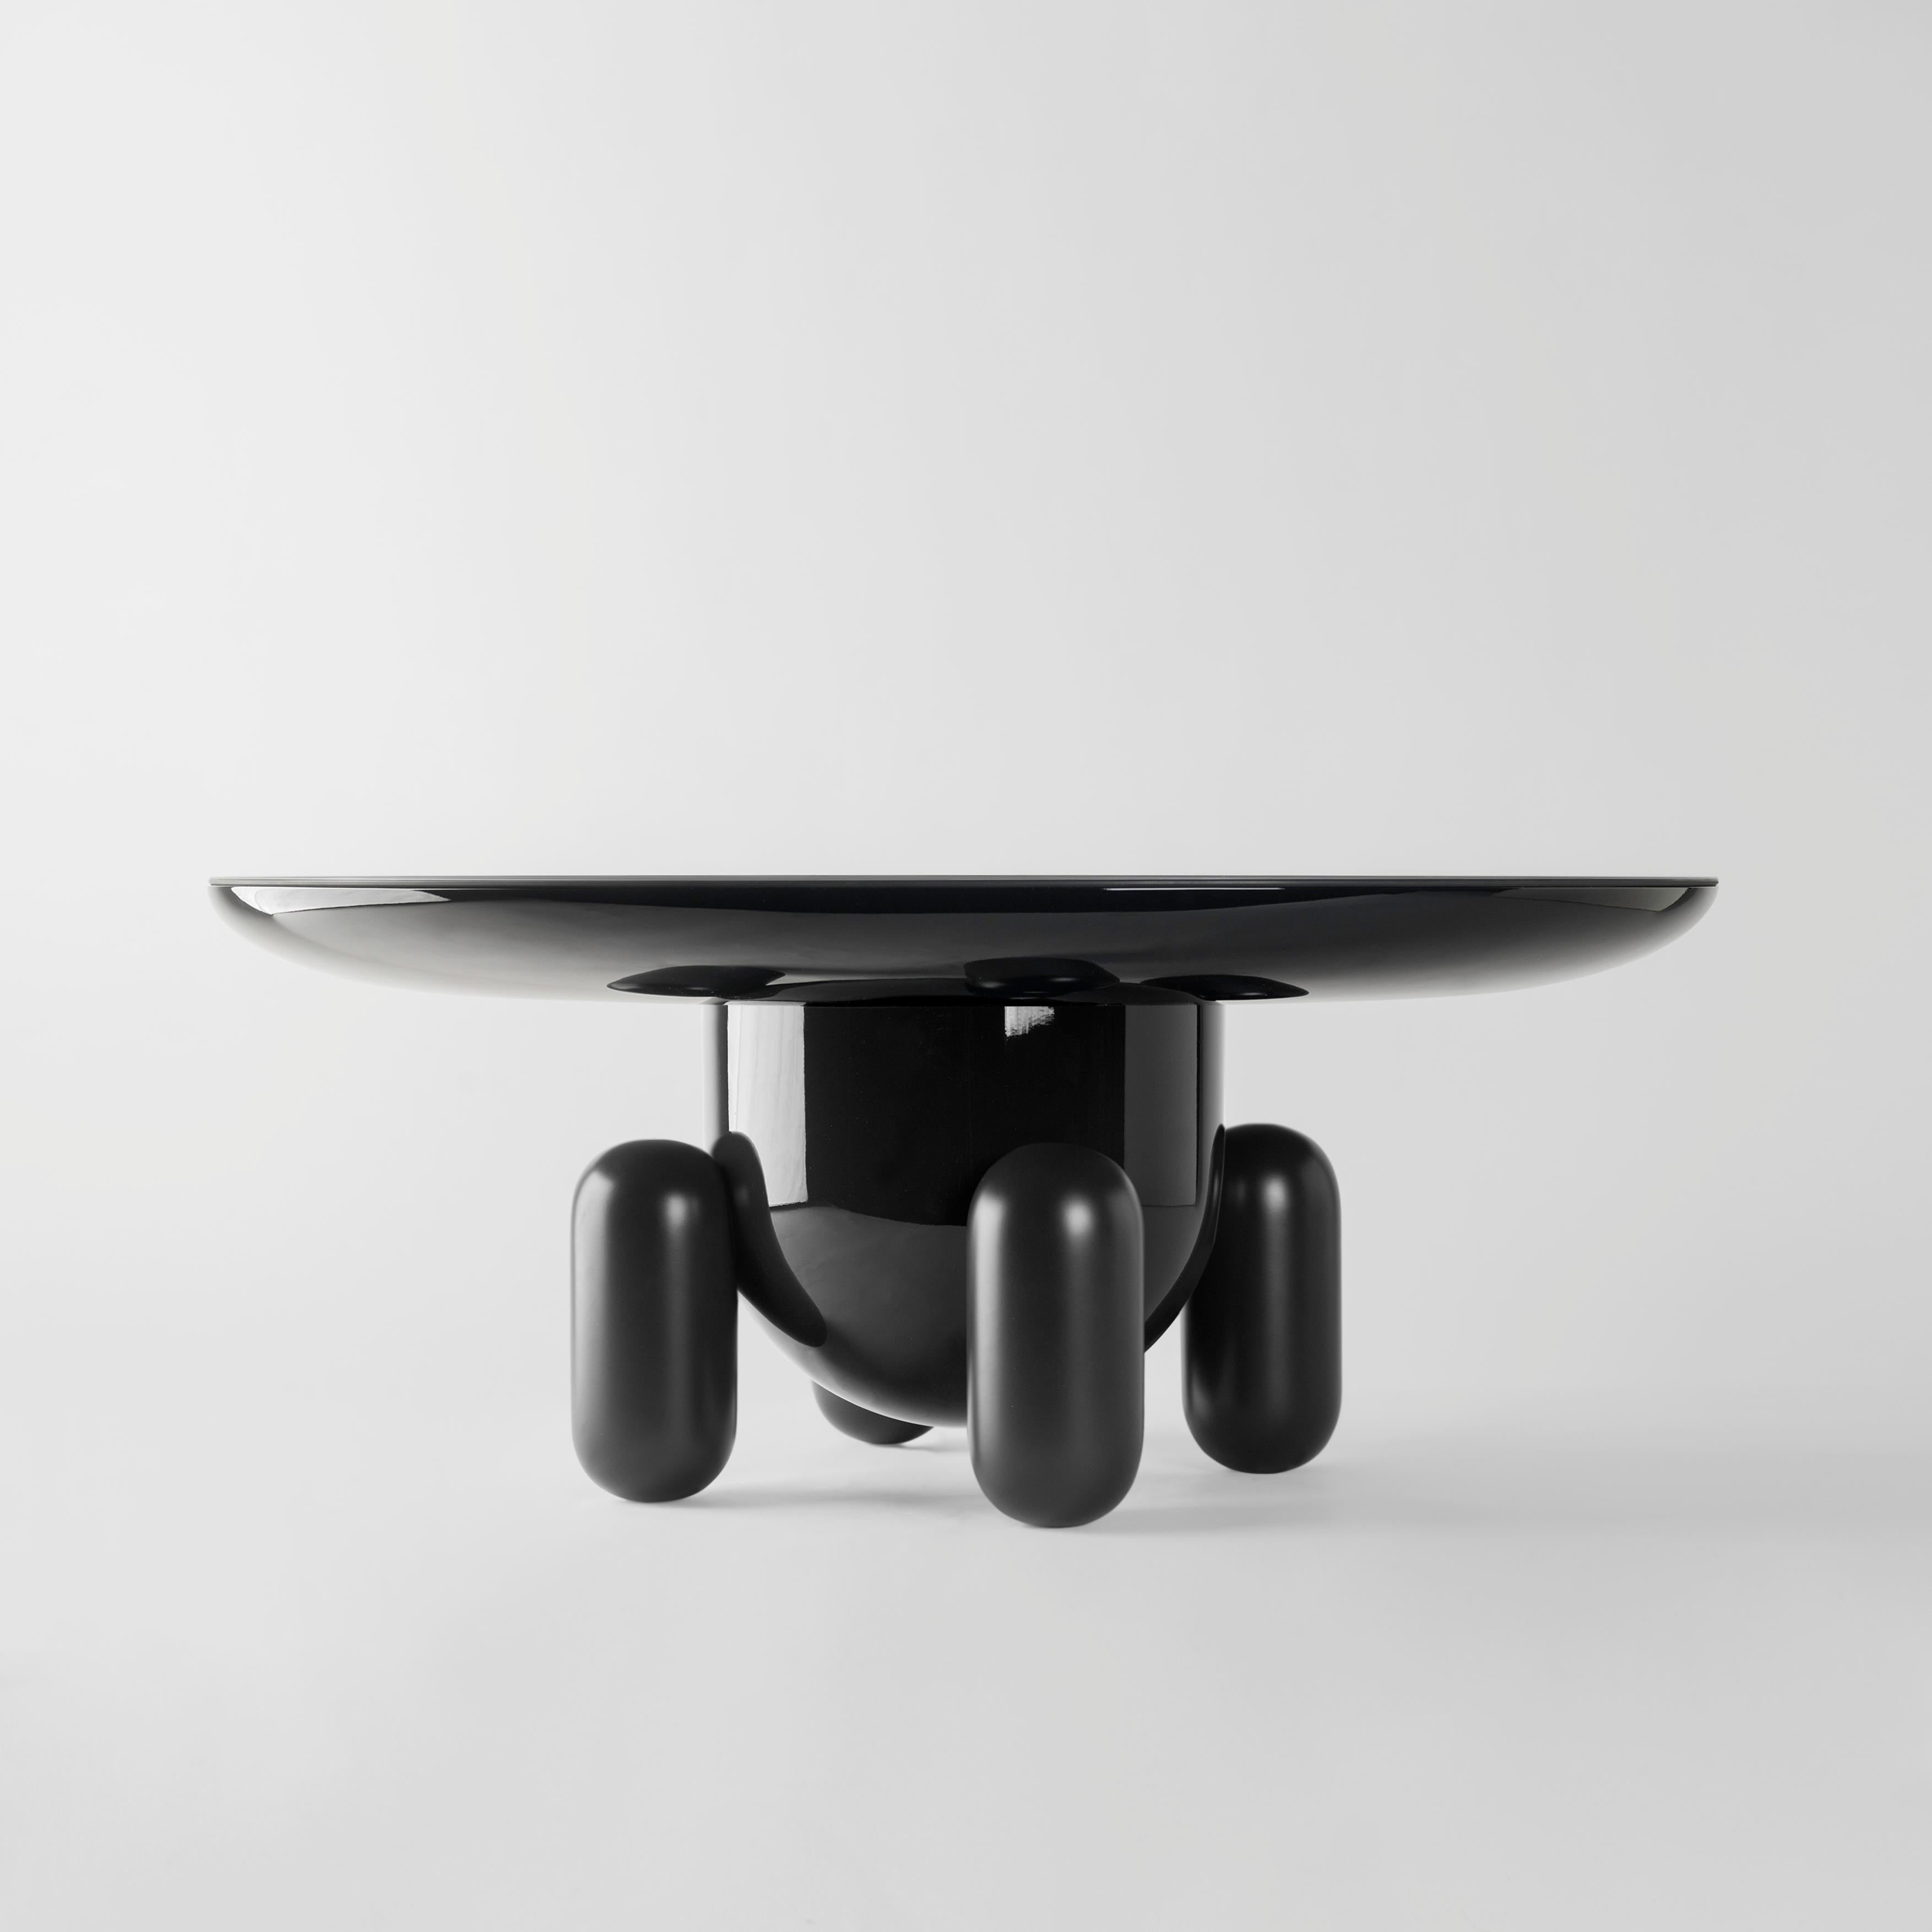 Dark grey explorer #03 table

Design by Jaime Hayon, 2019
Manufactured by BD Barcelona.

Laquered fibreglass body. Solid turned wooden legs and lacquered. Painted glass table top.

Measures: 100 Ø x 42 cm
40 Ø x 50 cm

- Glass RAL 7021
-